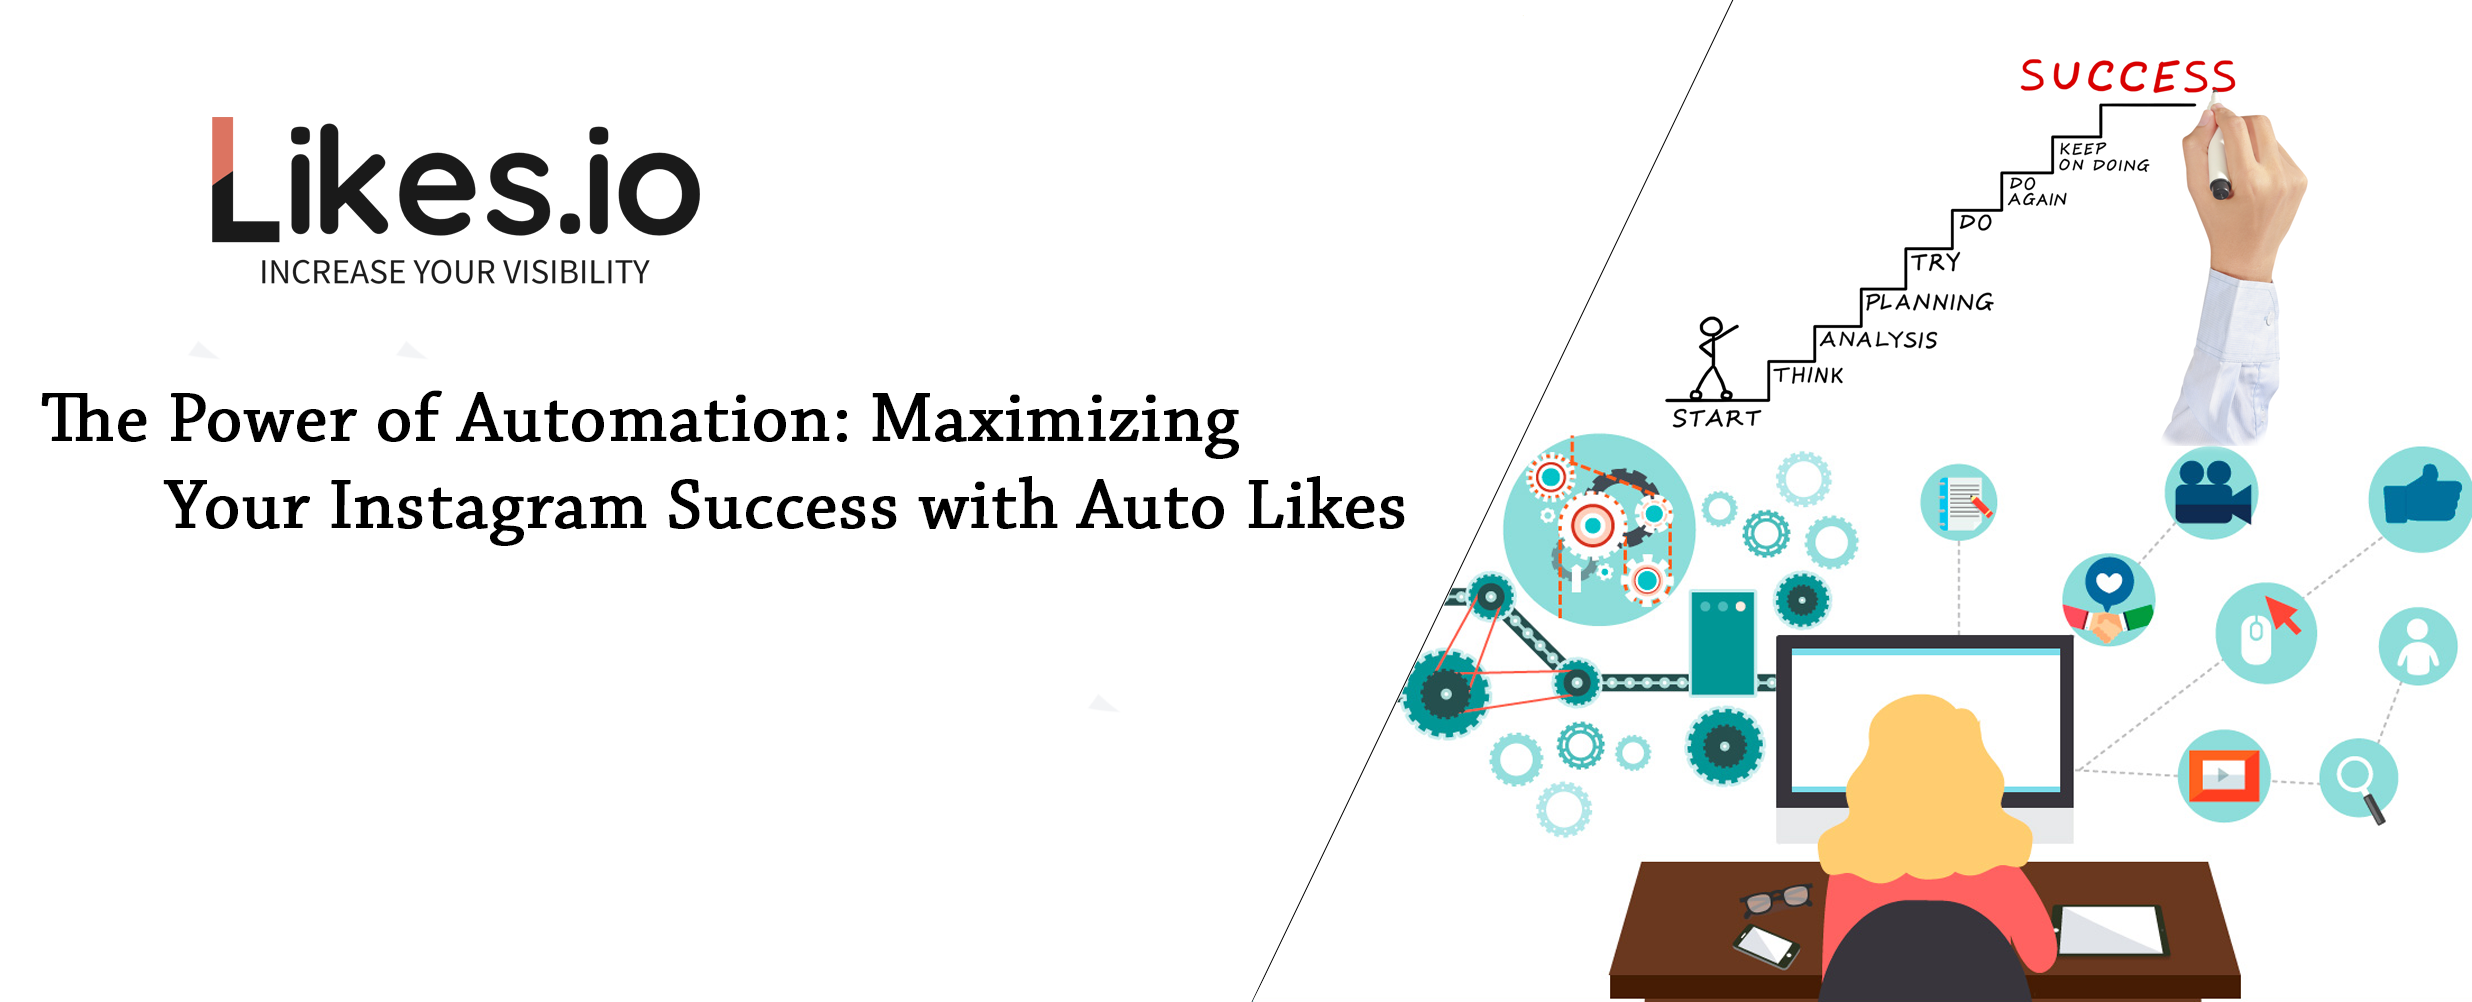 The Power of Automation: Maximizing Your Instagram Success with Auto Likes